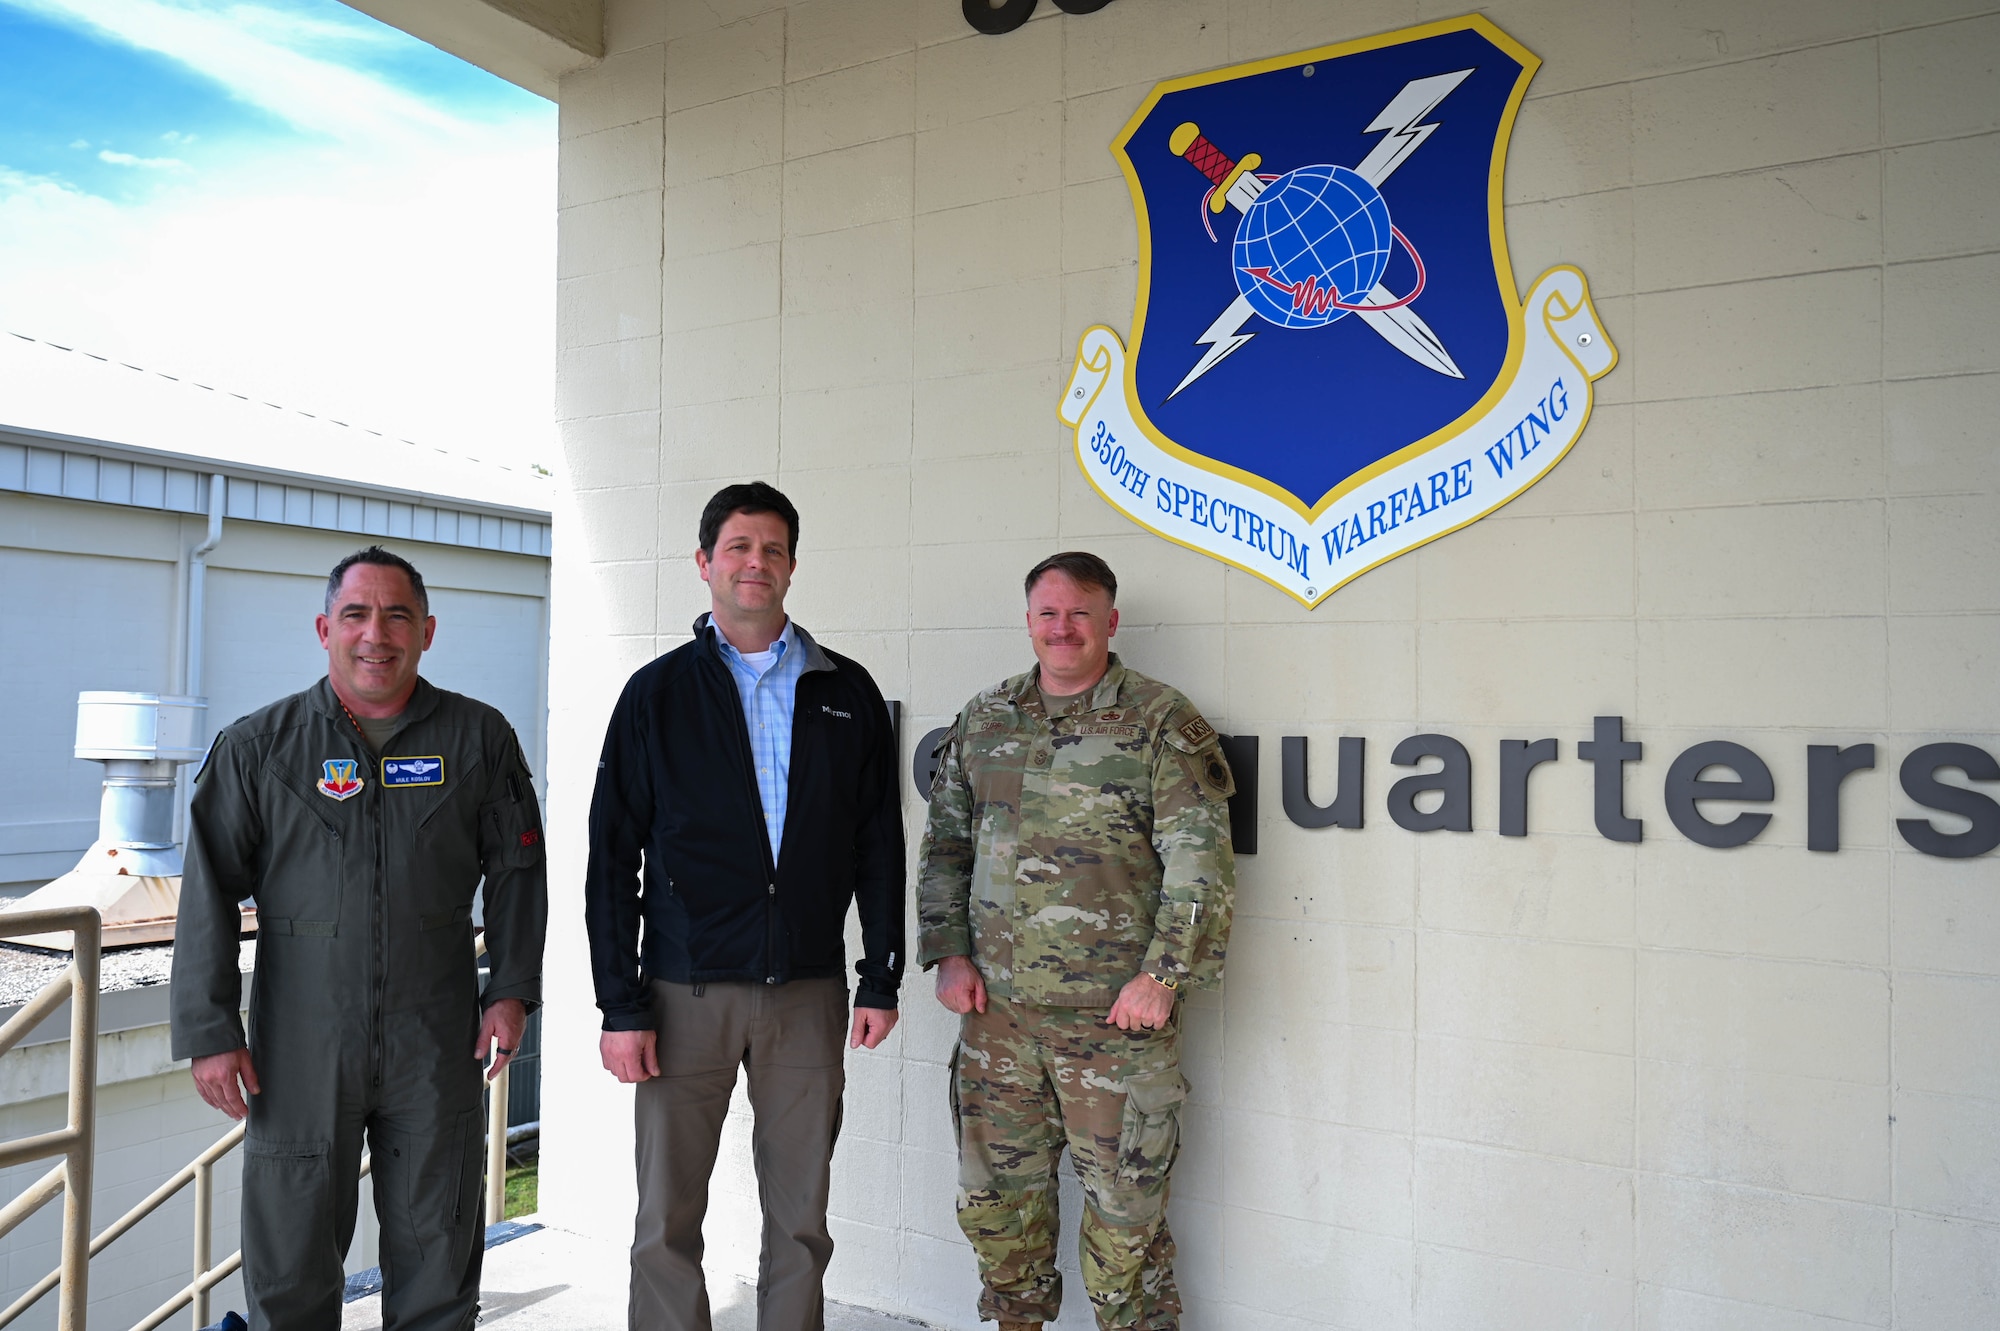 U.S. Air Force Col. Josh Koslov, 350th Spectrum Warfare Wing commander, left, Dr. John Plumb, Assistant Secretary of Defense for Space Policy, center, and U.S. Air Force Chief Master Sgt. Will Cupp, 350th SWW command chief, right, pose for a photo at the conclusion of a wing tour at Eglin Air Force Base, Fla., March 11, 2024. Plumb visited to the 350th SWW to learn about its mission to deliver adaptive and cutting-edge electromagnetic spectrum capabilities that provide the warfighter a tactical and strategic competitive advantage and freedom to attack, maneuver, and defend. (U.S. Air Force photo by Capt. Benjamin Aronson)